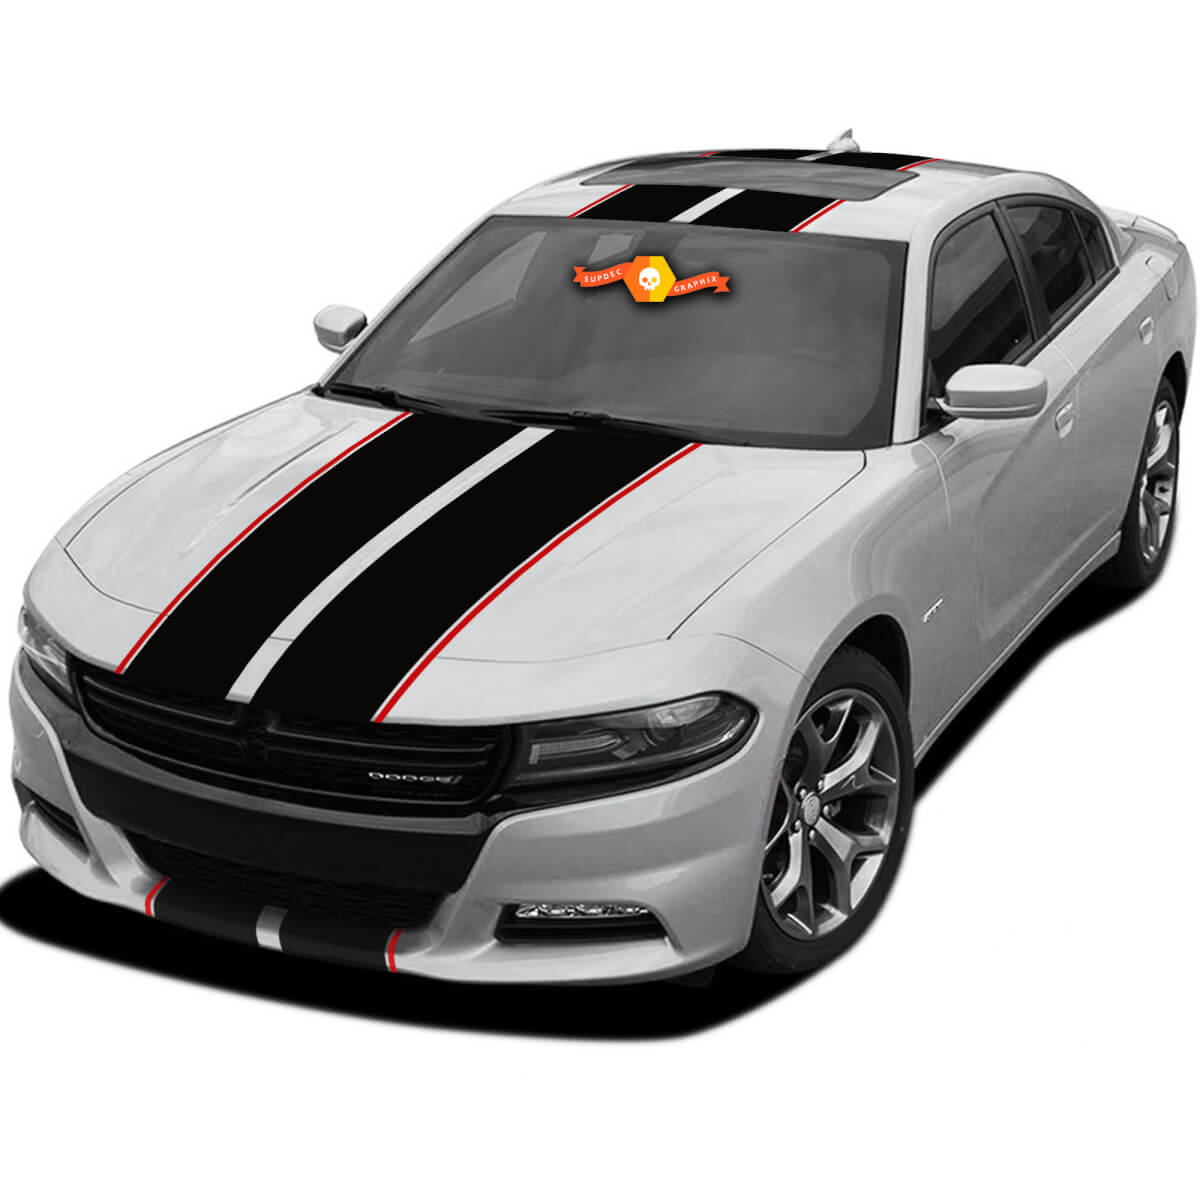 https://de.supdec.com/images/9560_1_2_color_10_twin_rally_stripes_stripe_graphics_decals_all_year_dodge_charger.jpg